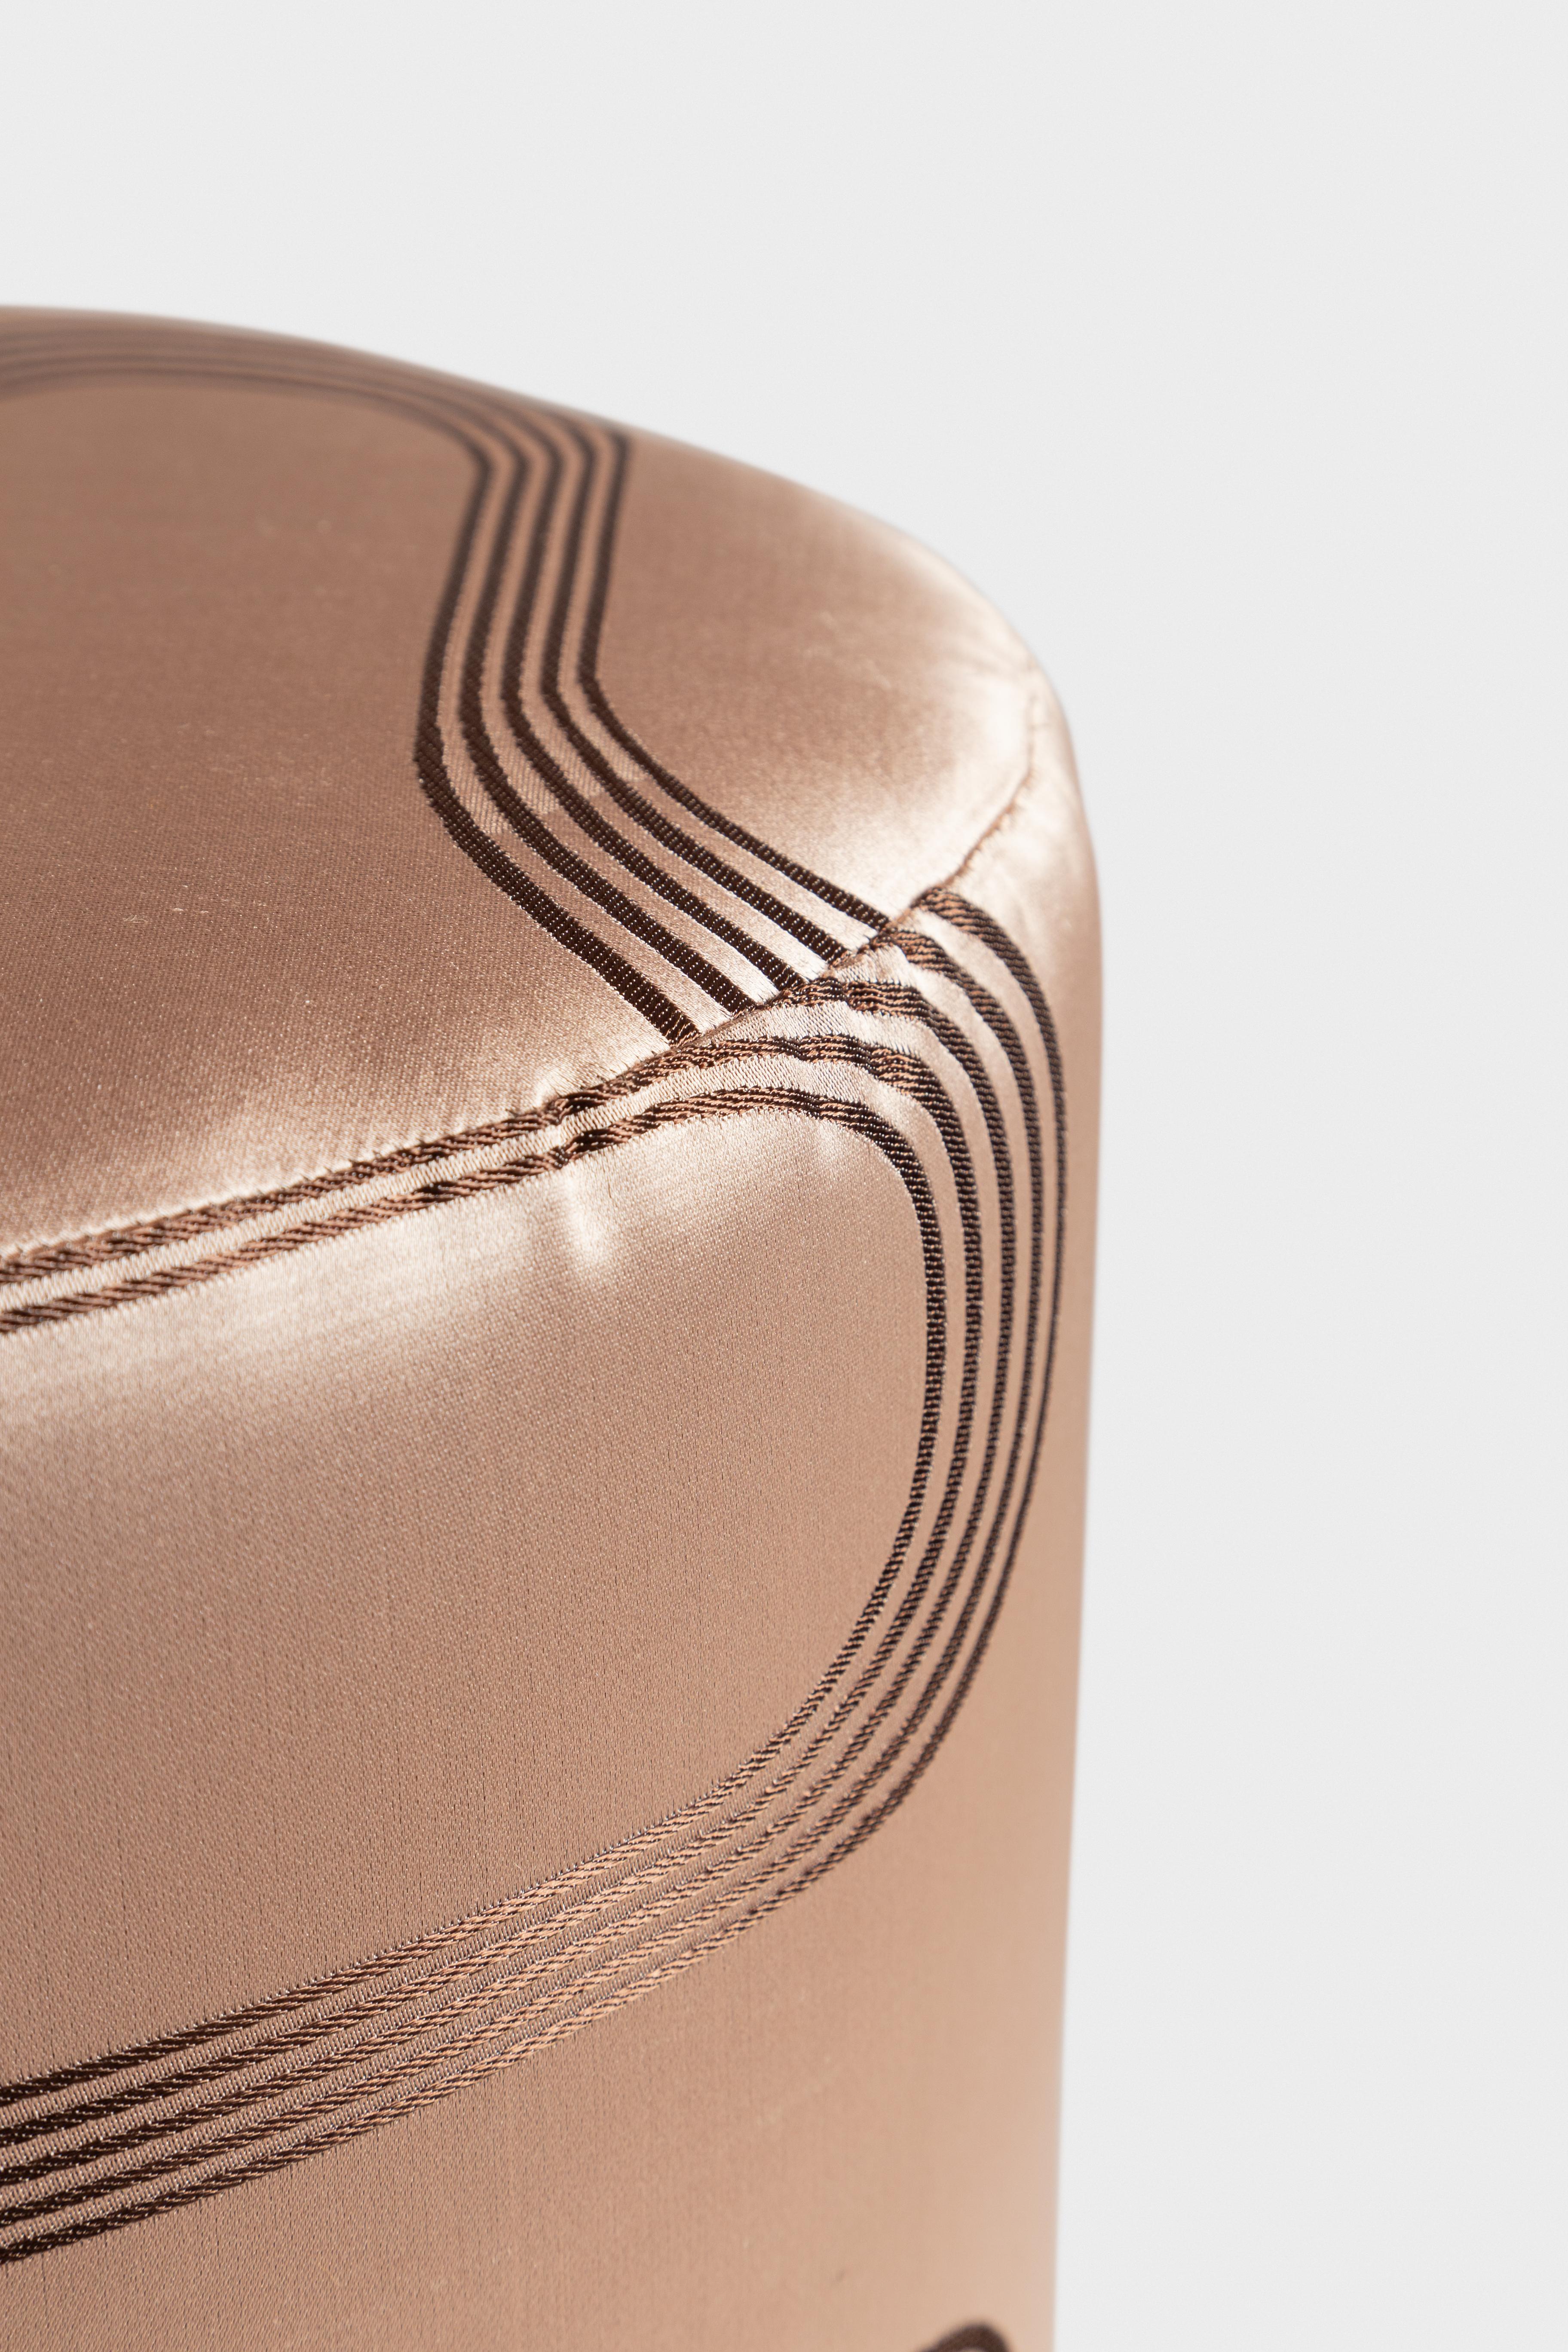 Italian Vague Pink, Contemporary Pouf Footstools by Vito Nesta For Sale